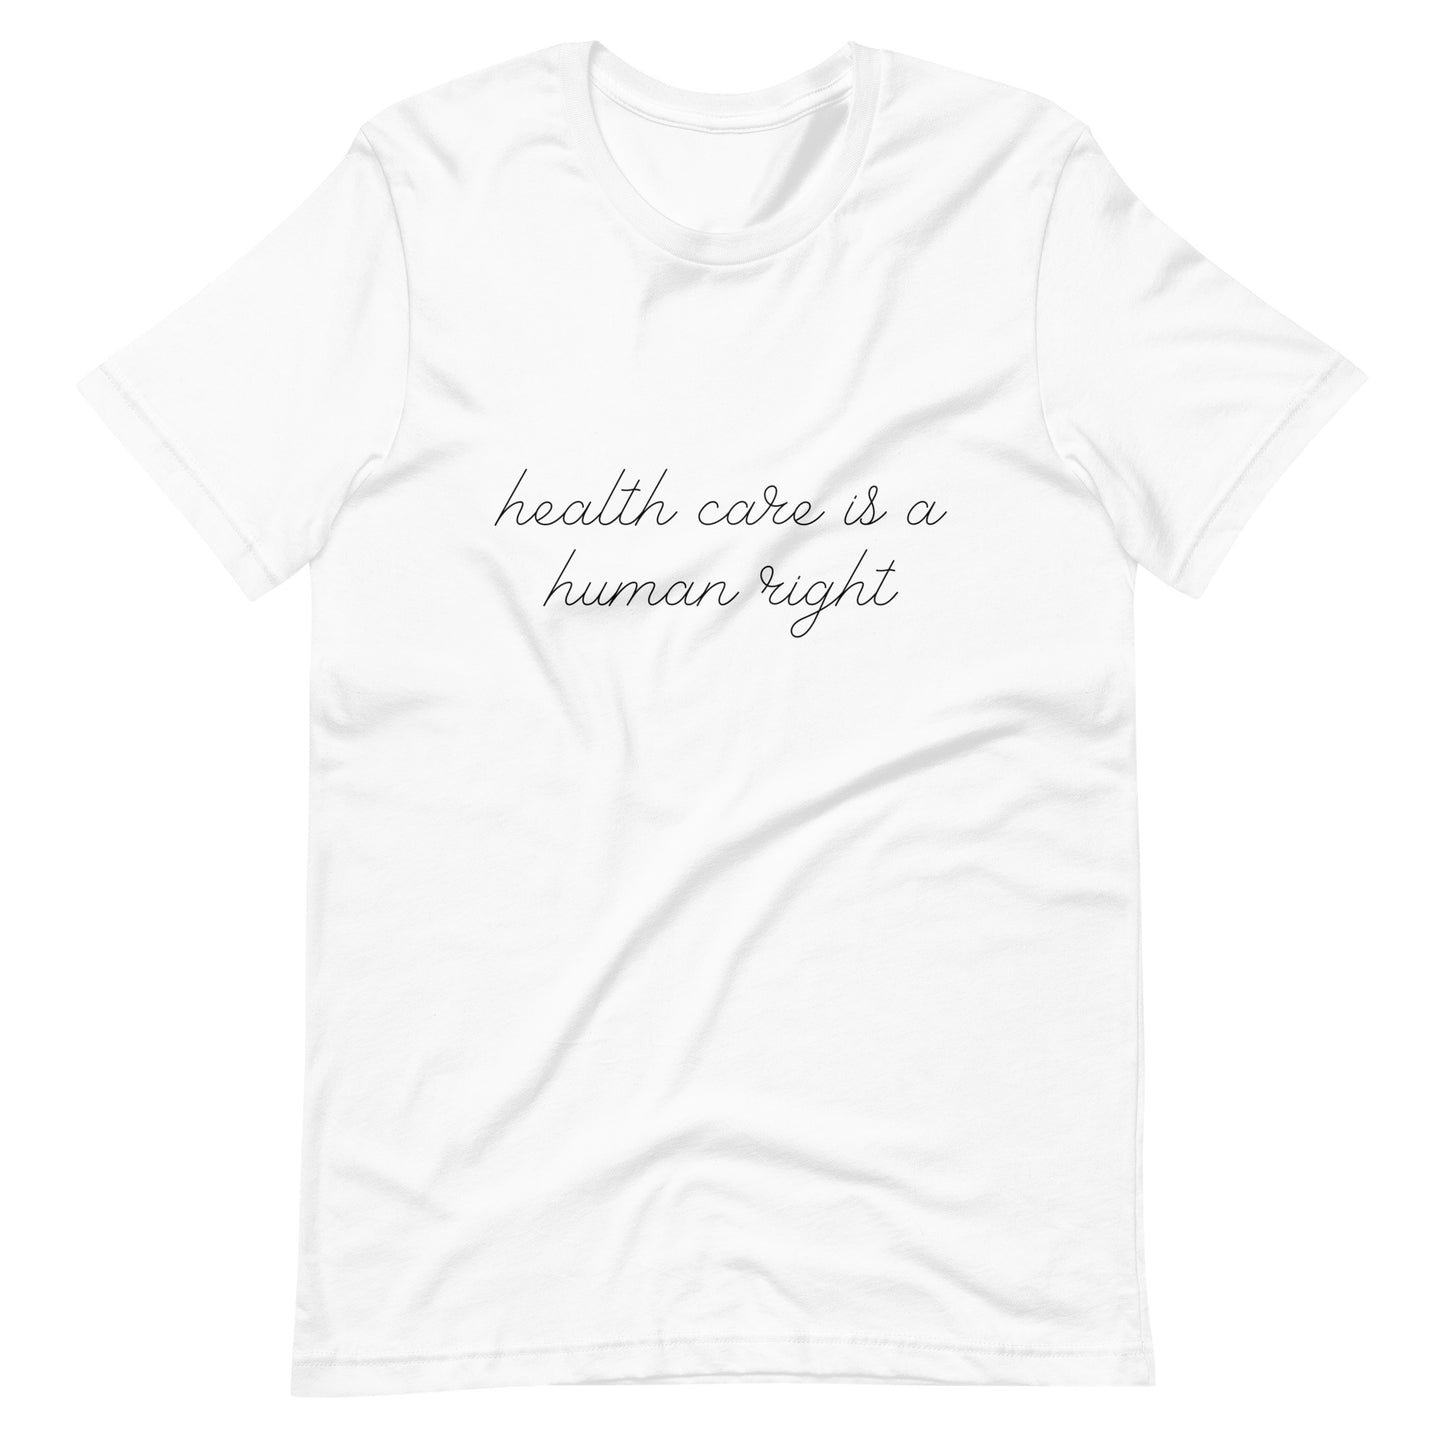 health care is a human right t-shirt - Bad Perfectionist Co.